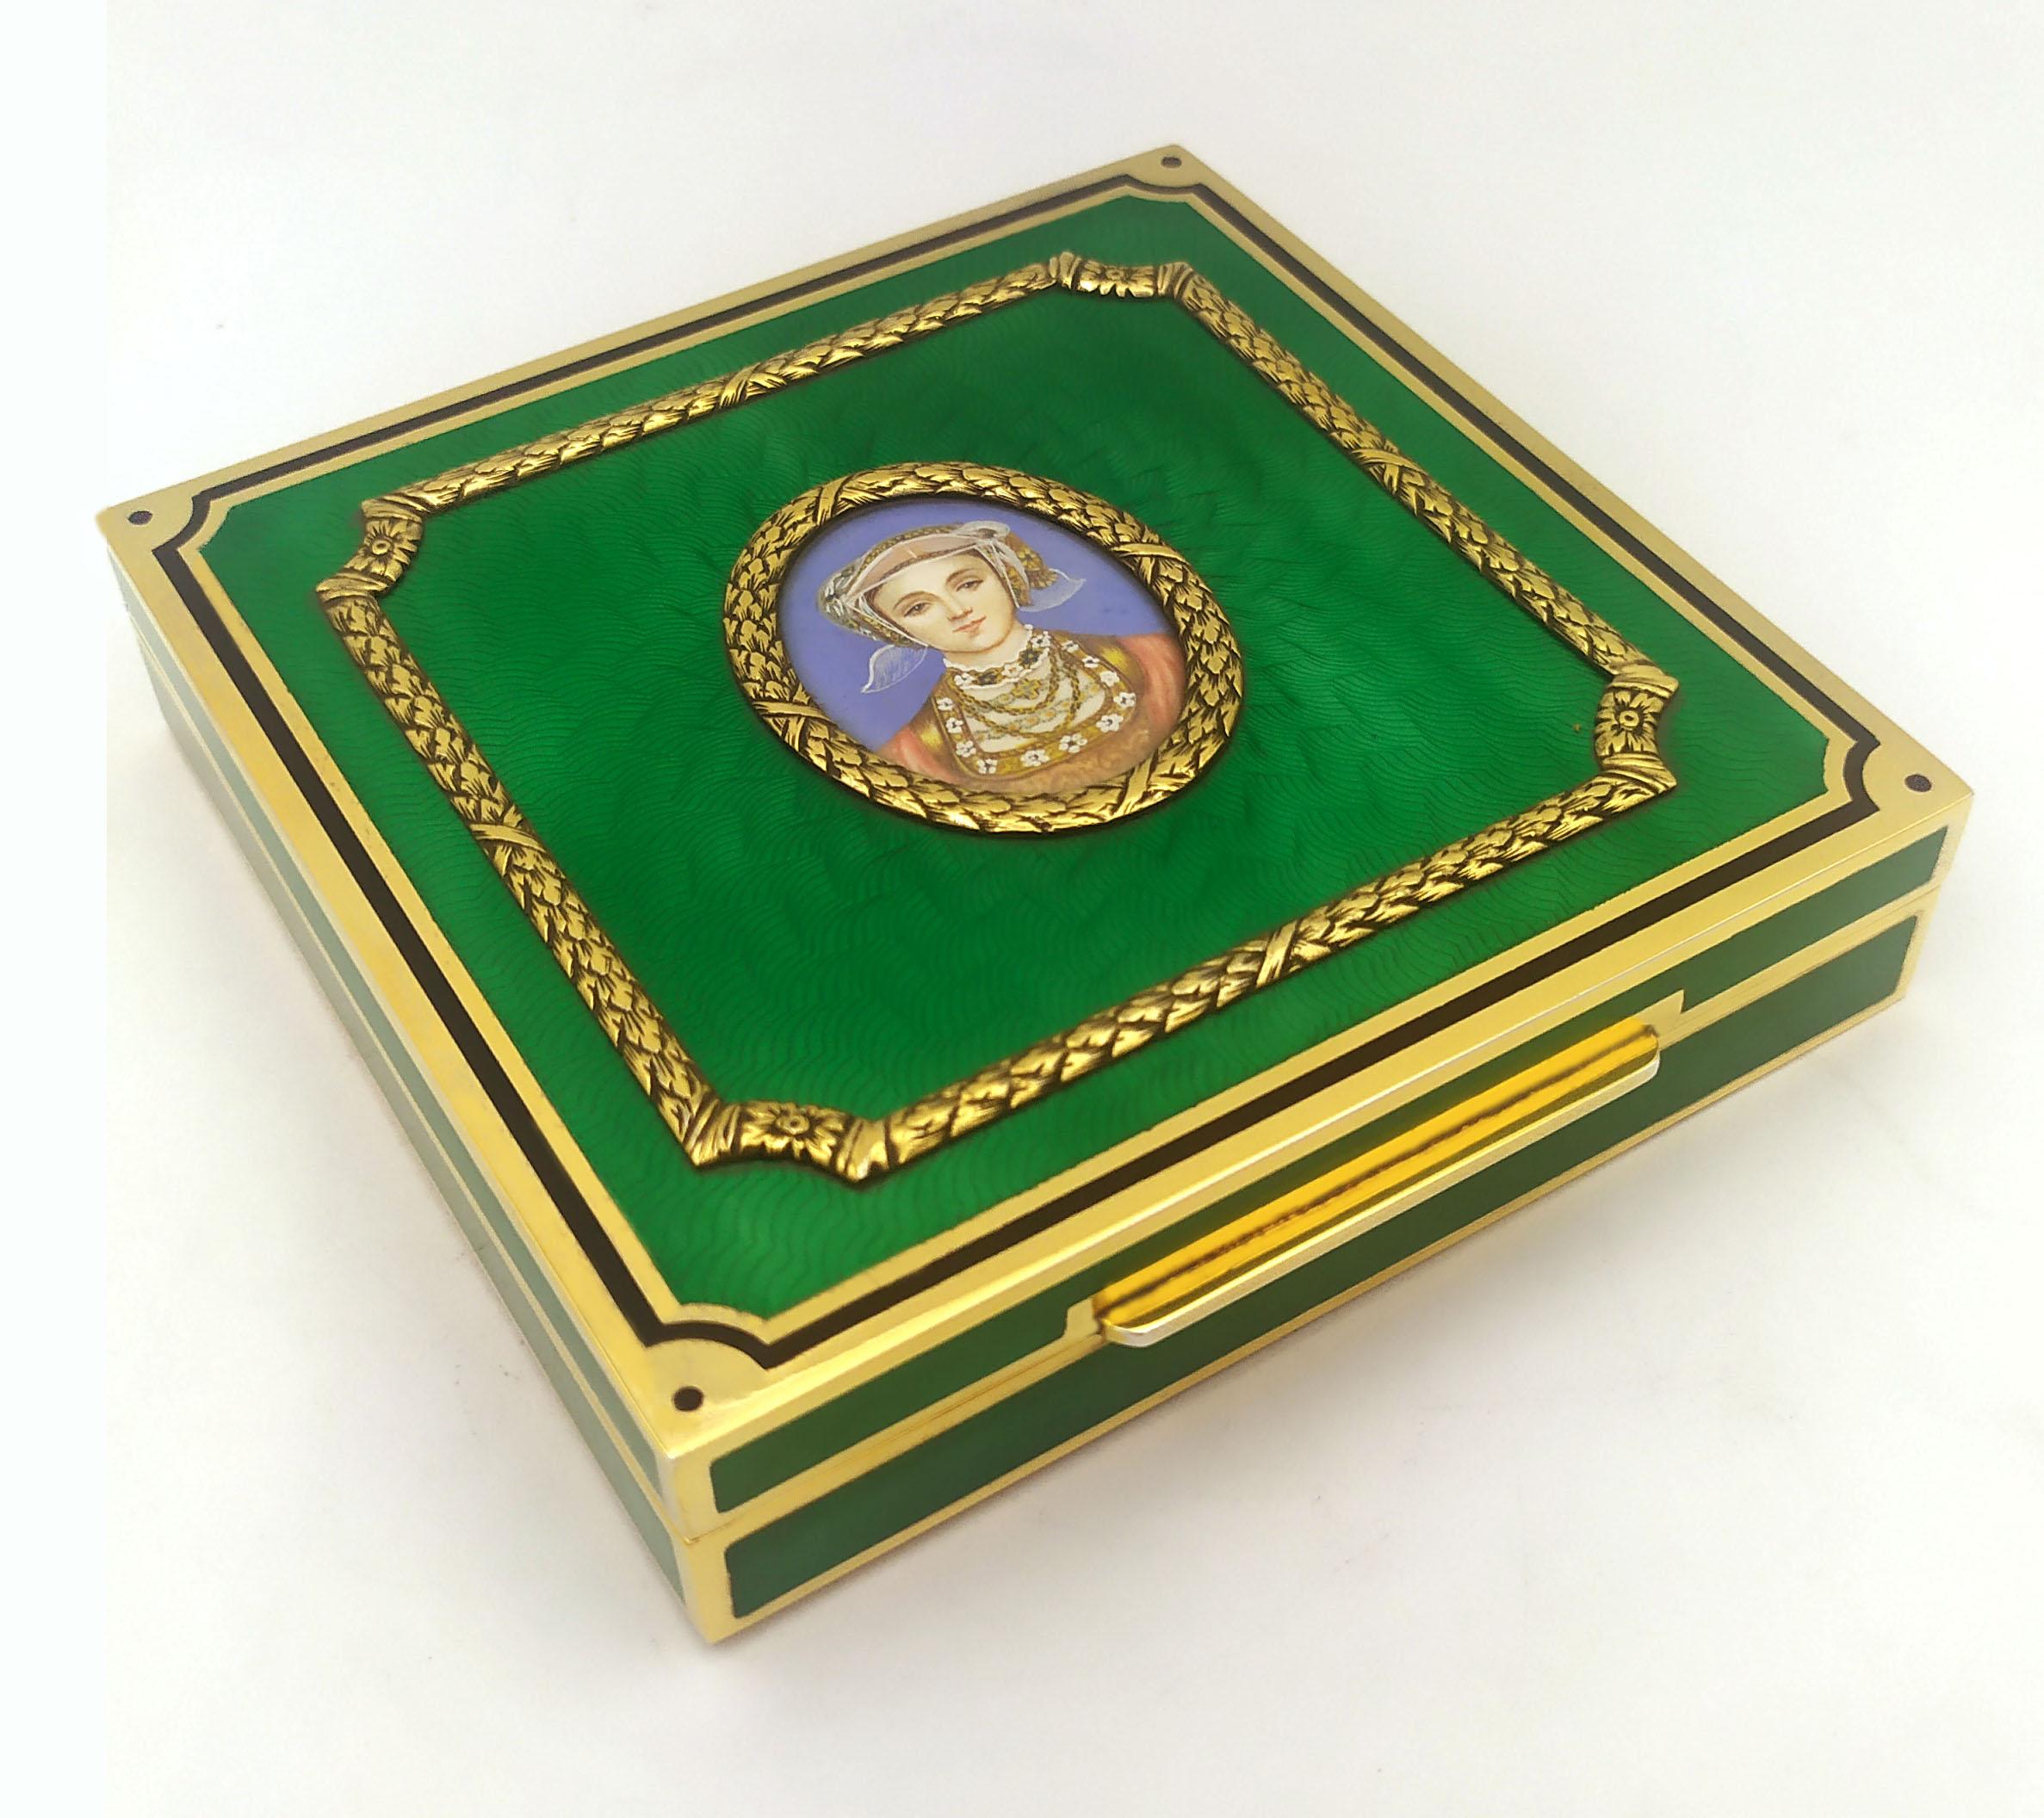 Square table box in 925/1000 sterling silver gold plated with translucent fired enamels on sunburst guillochè and Louis XVI French Empire style ornaments. External measurements cm. 12 x 12 x 2.5. Weight gr. 636- Fine oval miniature cm. 3.2 x 4.2